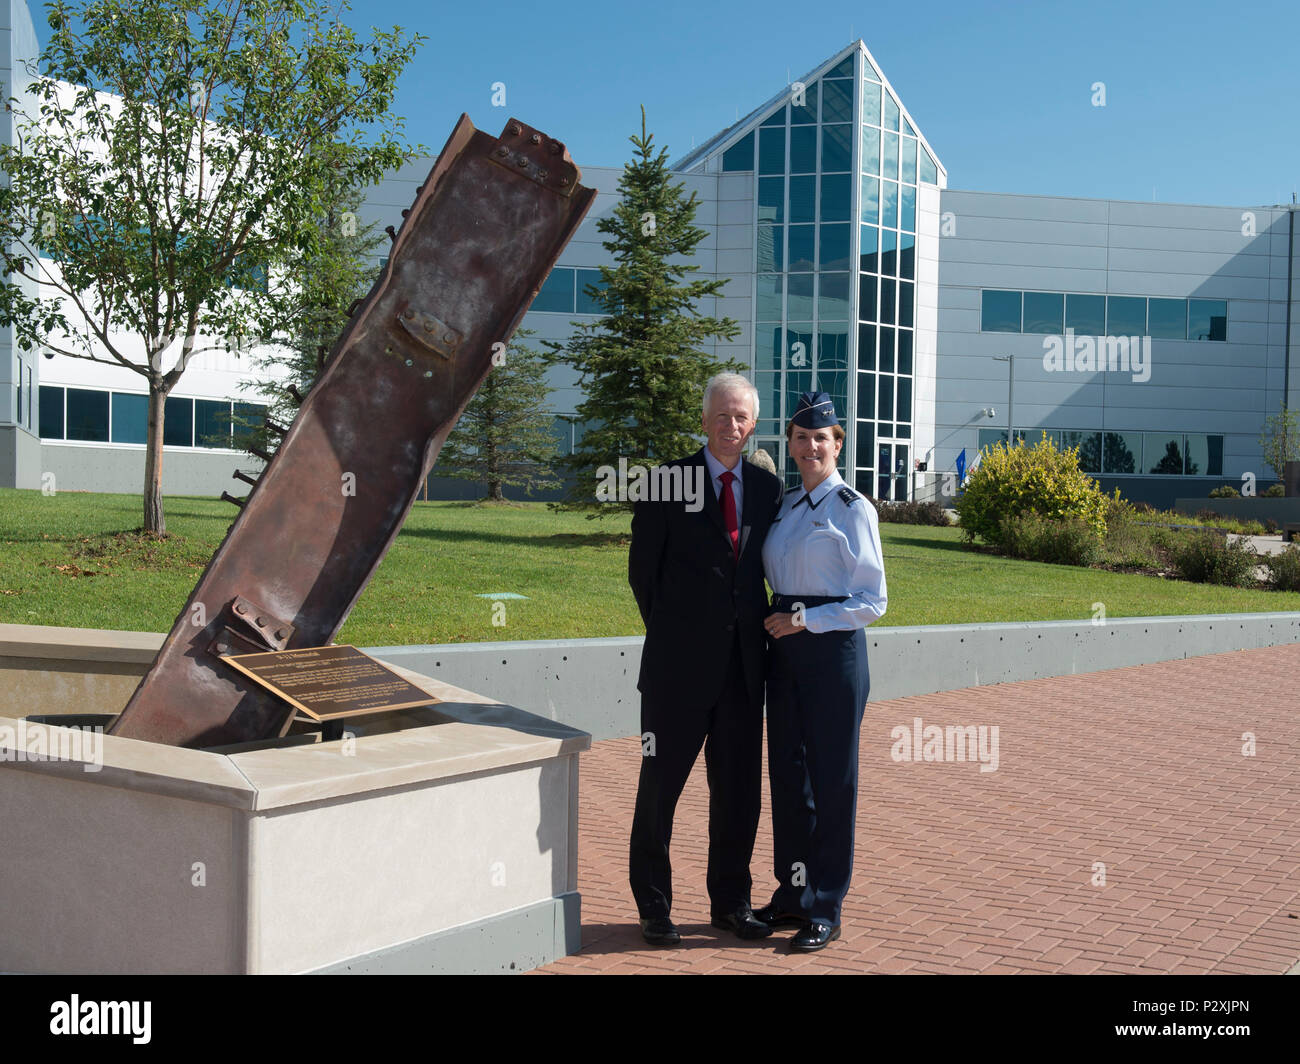 U.S. Air Force Gen. Lori Robinson, Commander of North American Aerospace Defense Command and United States Northern Command, poses with the Honourable Stephane Dion, Canadian Minister of Foreign Affairs, to the NORAD and USNORTHCOM at the 9/11 Memorial outside the command’s headquarters in Colorado Springs, Colo., Aug 8, 2016. During his visit, Minister Dion was briefed on both NORAD and USNORTHCOM missions and the unique partnership that the U.S. and Canada share. (Photo by: N-NC Public Affairs/Released) Stock Photo